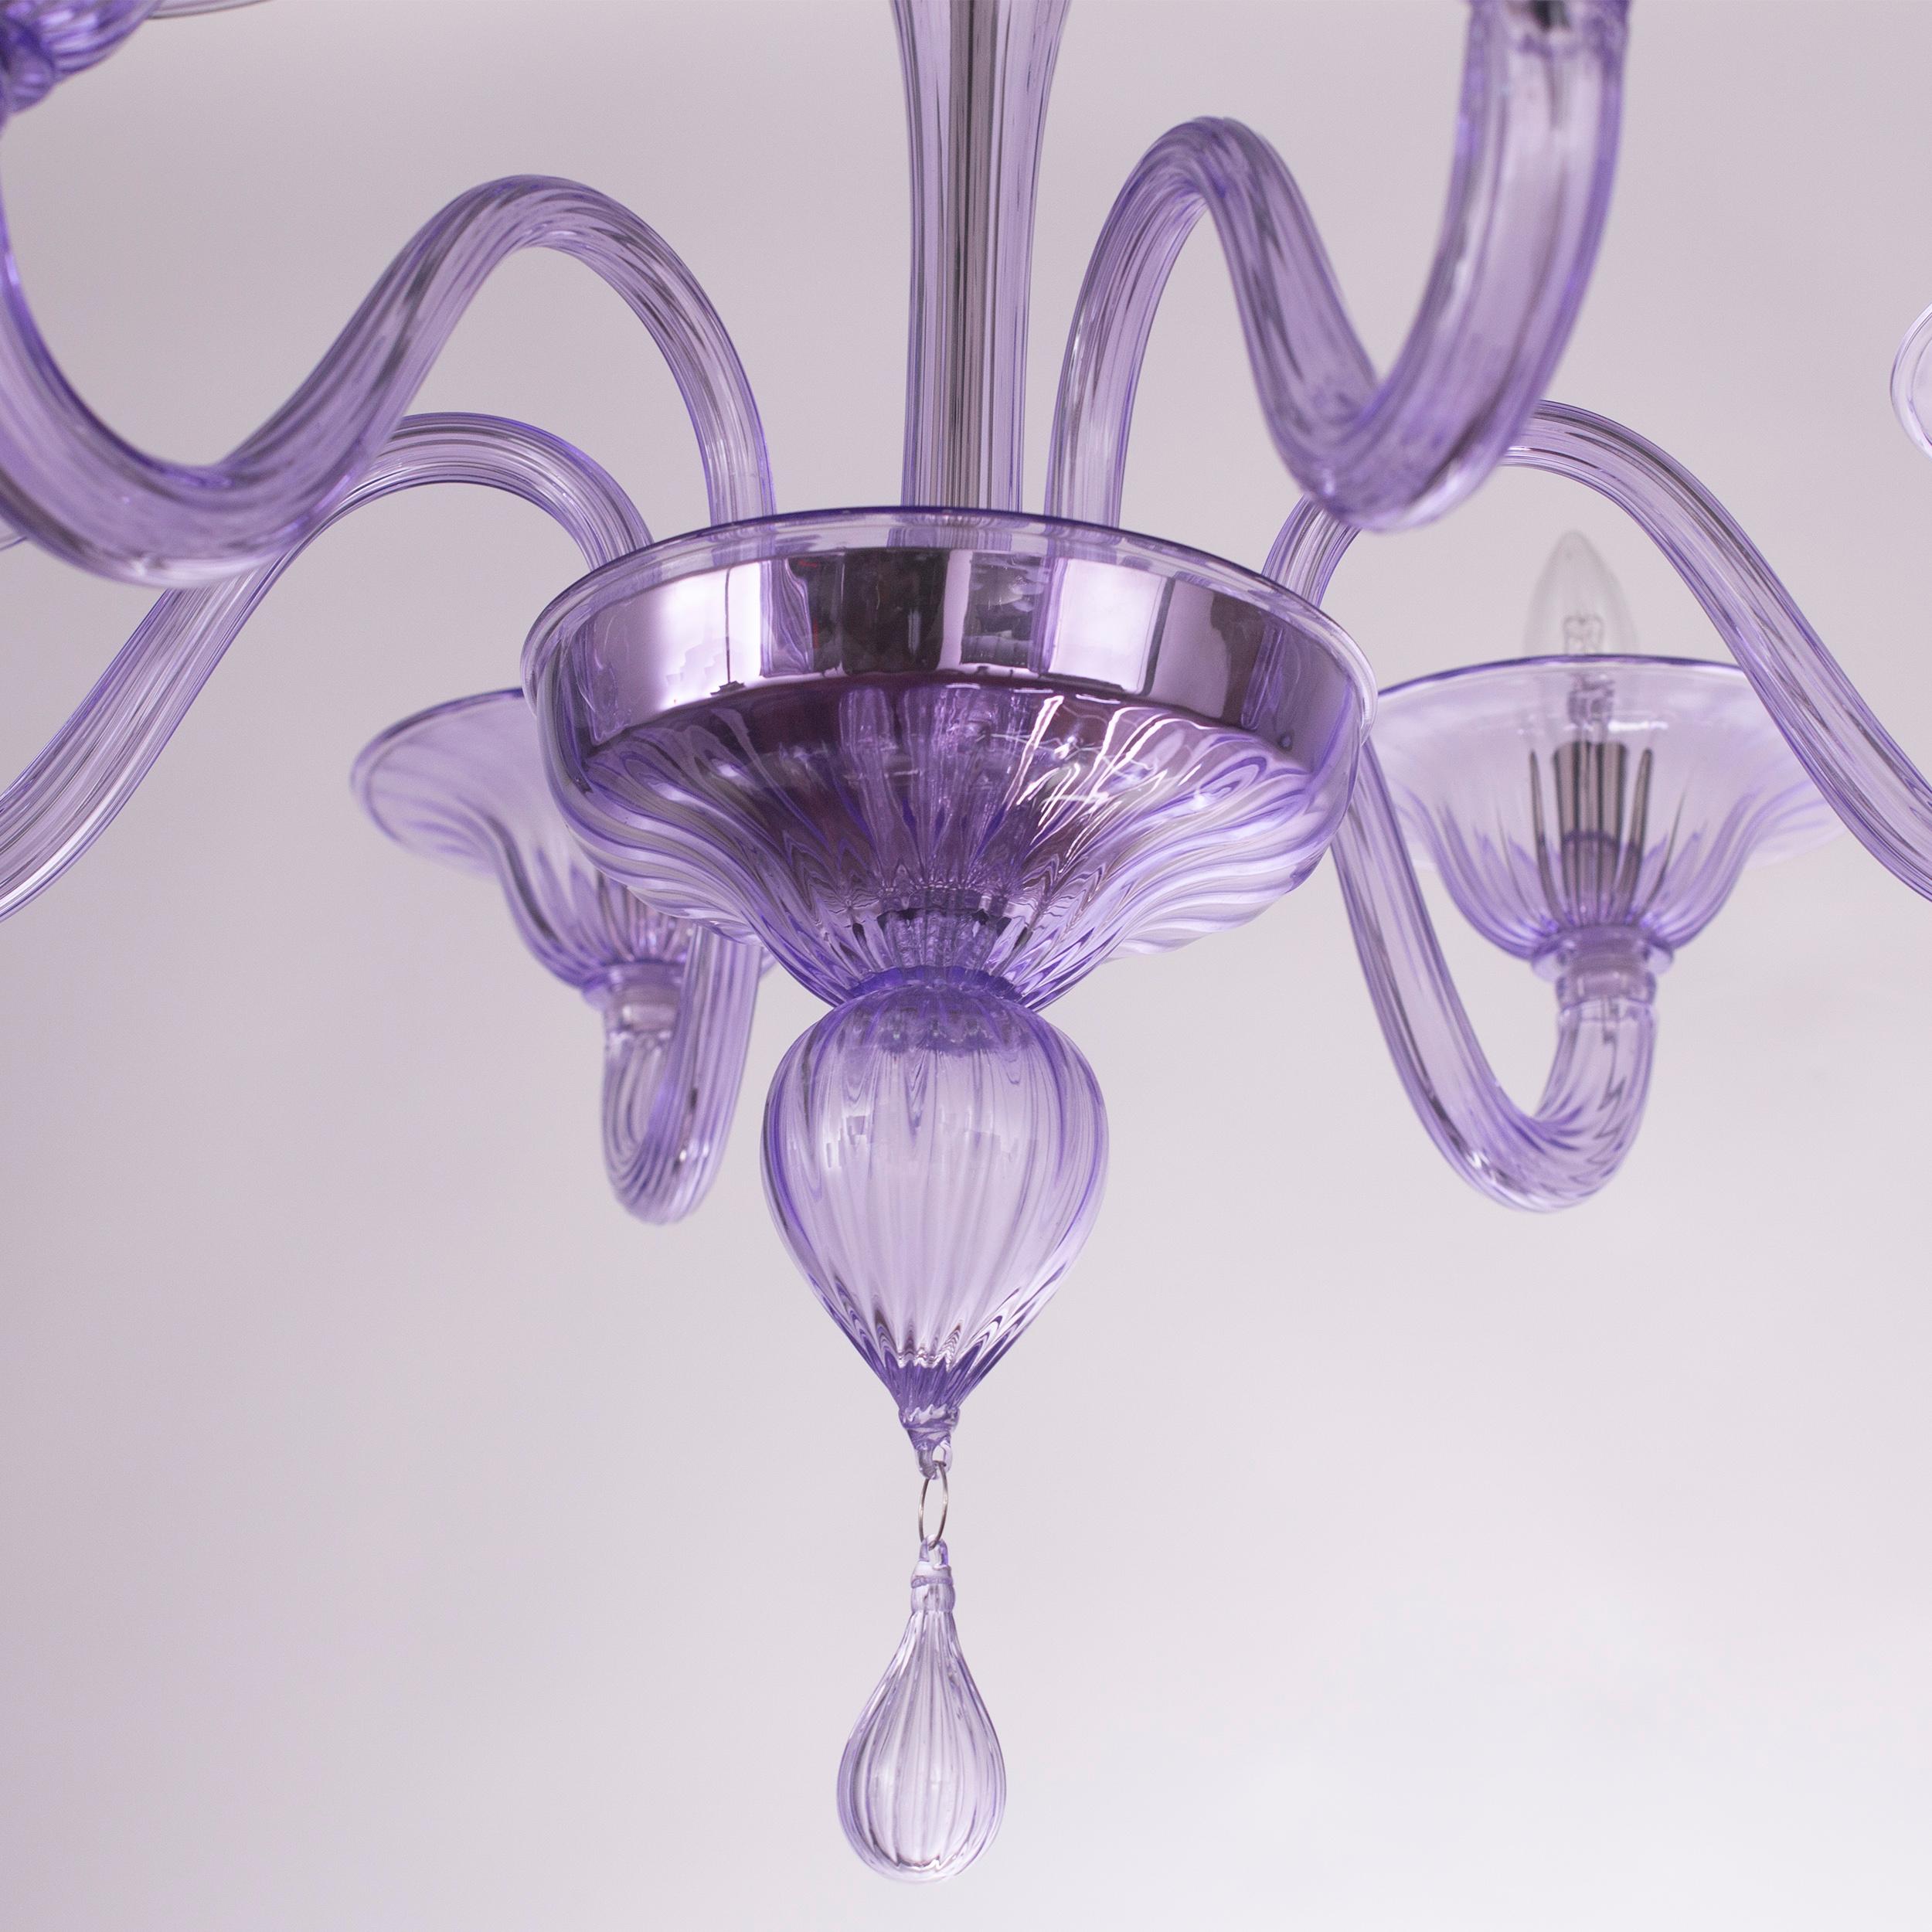 Simplicissimus Chandelier, 6 Arms lilac Murano Glass by Multiforme In New Condition For Sale In Trebaseleghe, IT